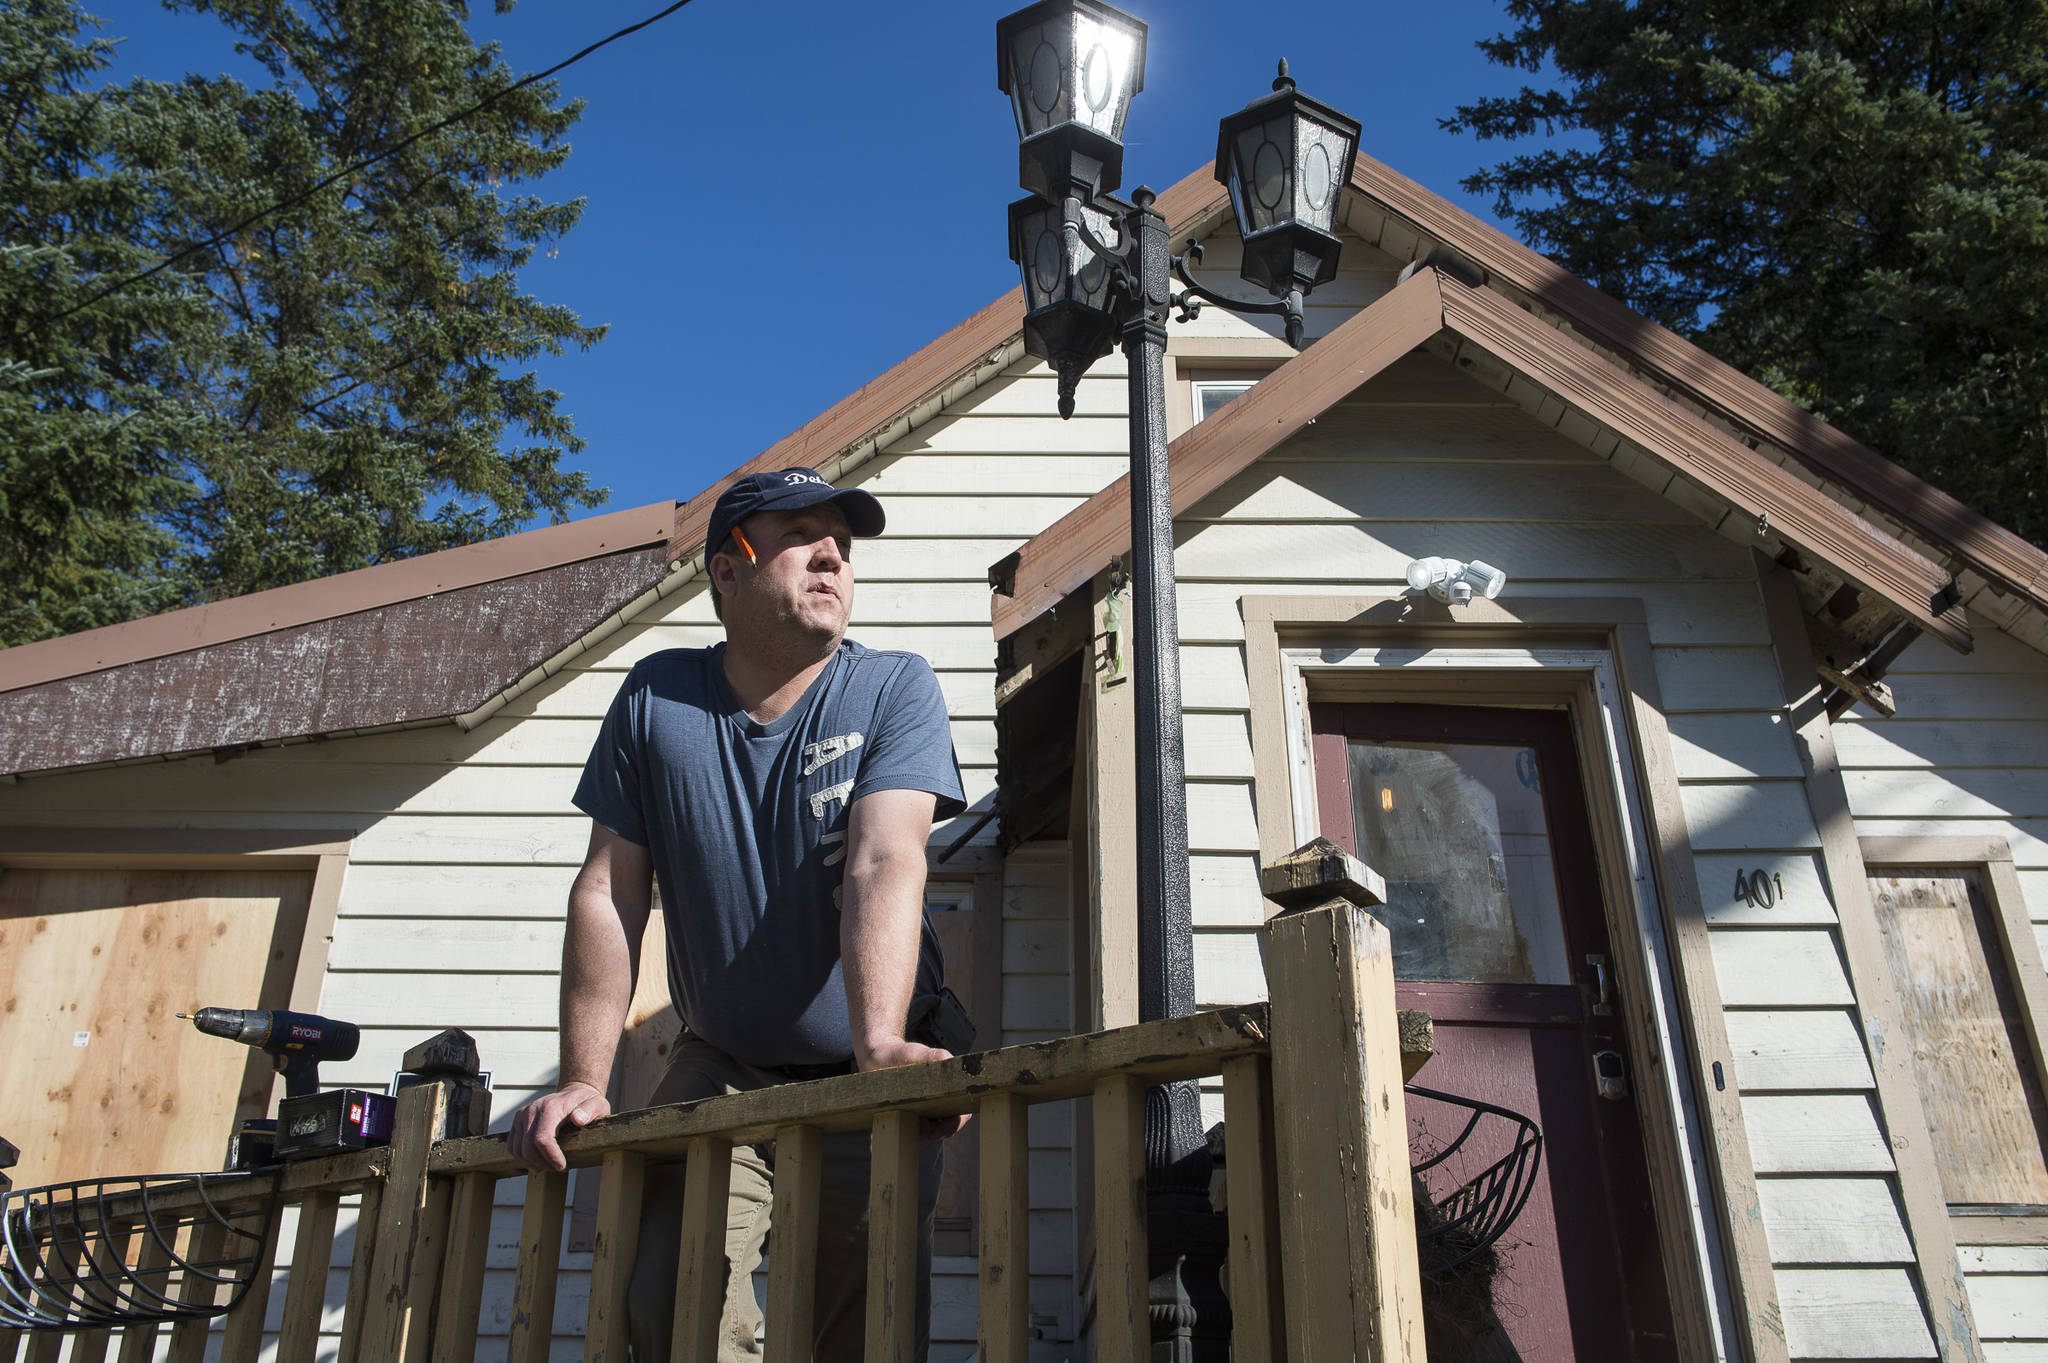 Dave d’Amato, an attorney working for Kathleen Barrett, spends Monday, Oct. 1, 2018, boarding up the house at 401 Harris Street. The house was vacated this weekend after a judge ordered its residents (including co-owner James Barrett) to leave due to code and safety violations. (Michael Penn | Juneau Empire)